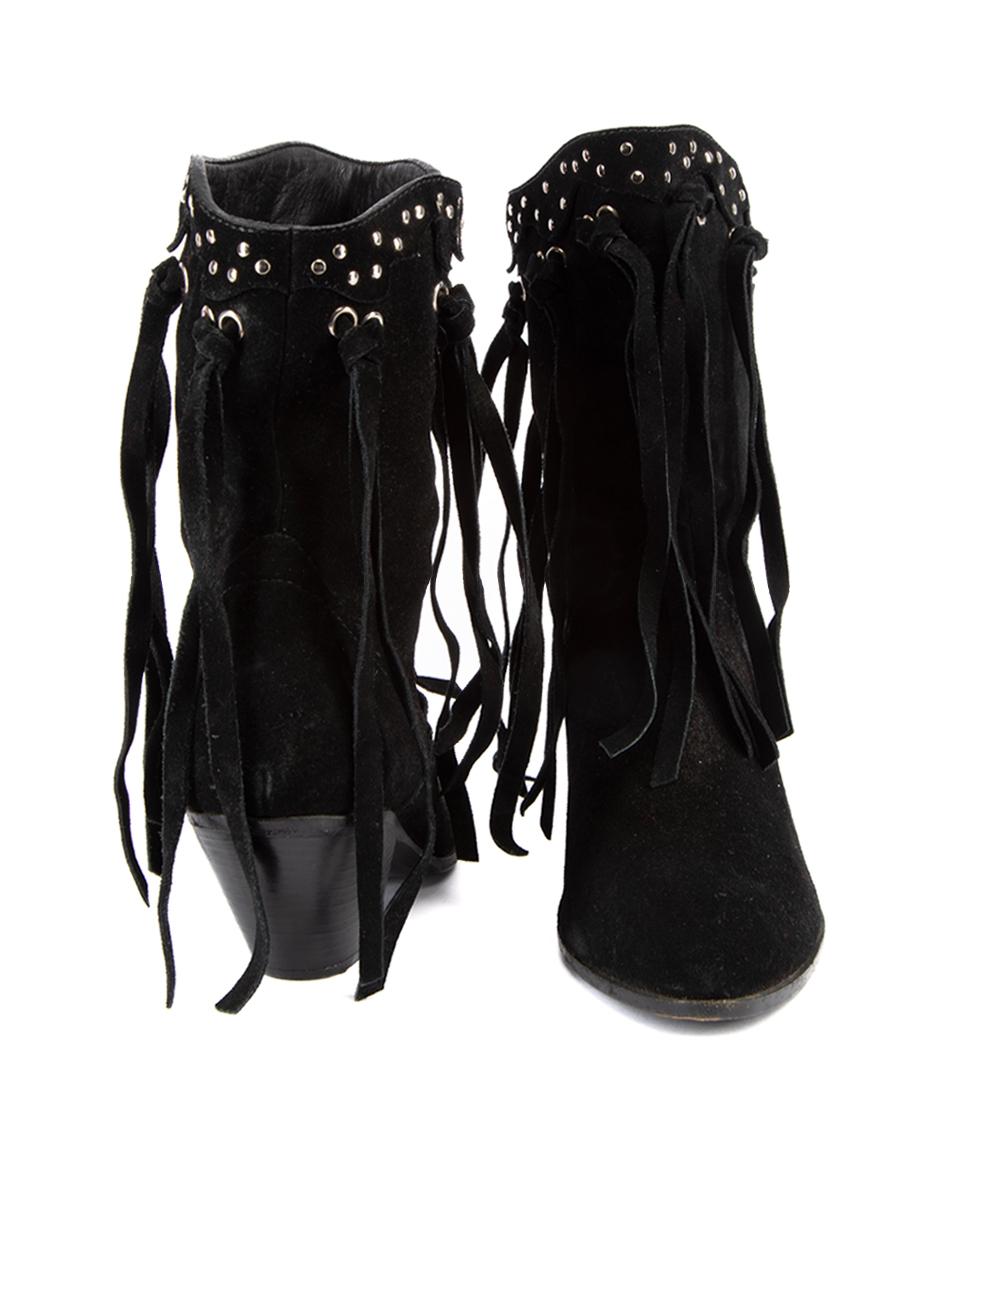 Pre-Loved Giuseppe Zanotti Women's Black Suede Studded Fringe Cowboy Boots In Excellent Condition For Sale In London, GB